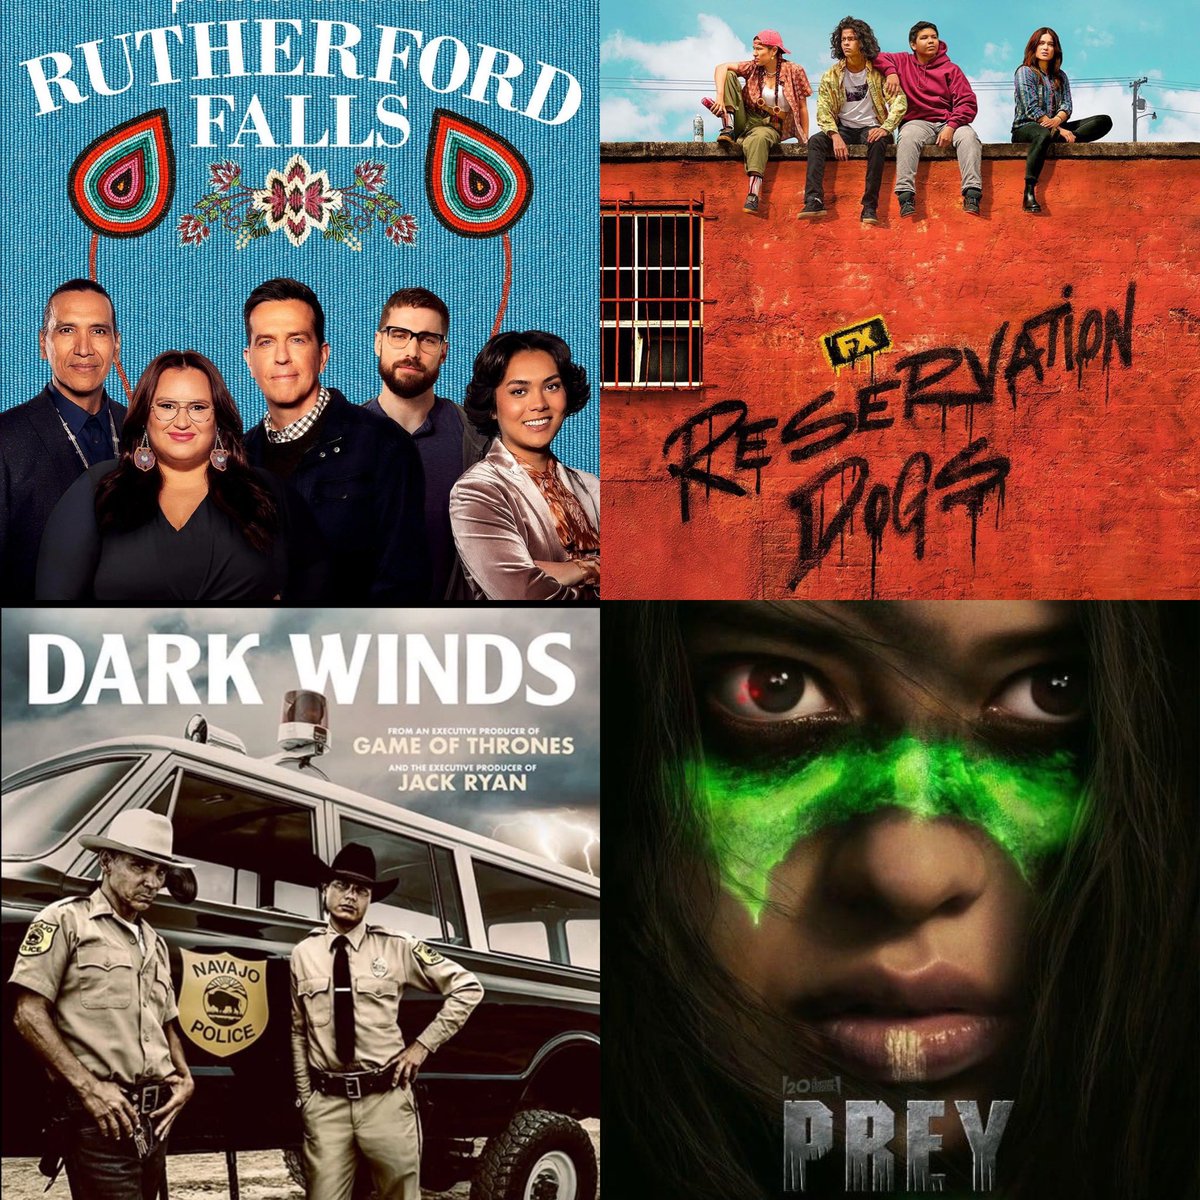 Been a good year for Indigenous television and film. #RutherfordFalls #ReservationDogs #DarkWInds #Prey ✊🏾